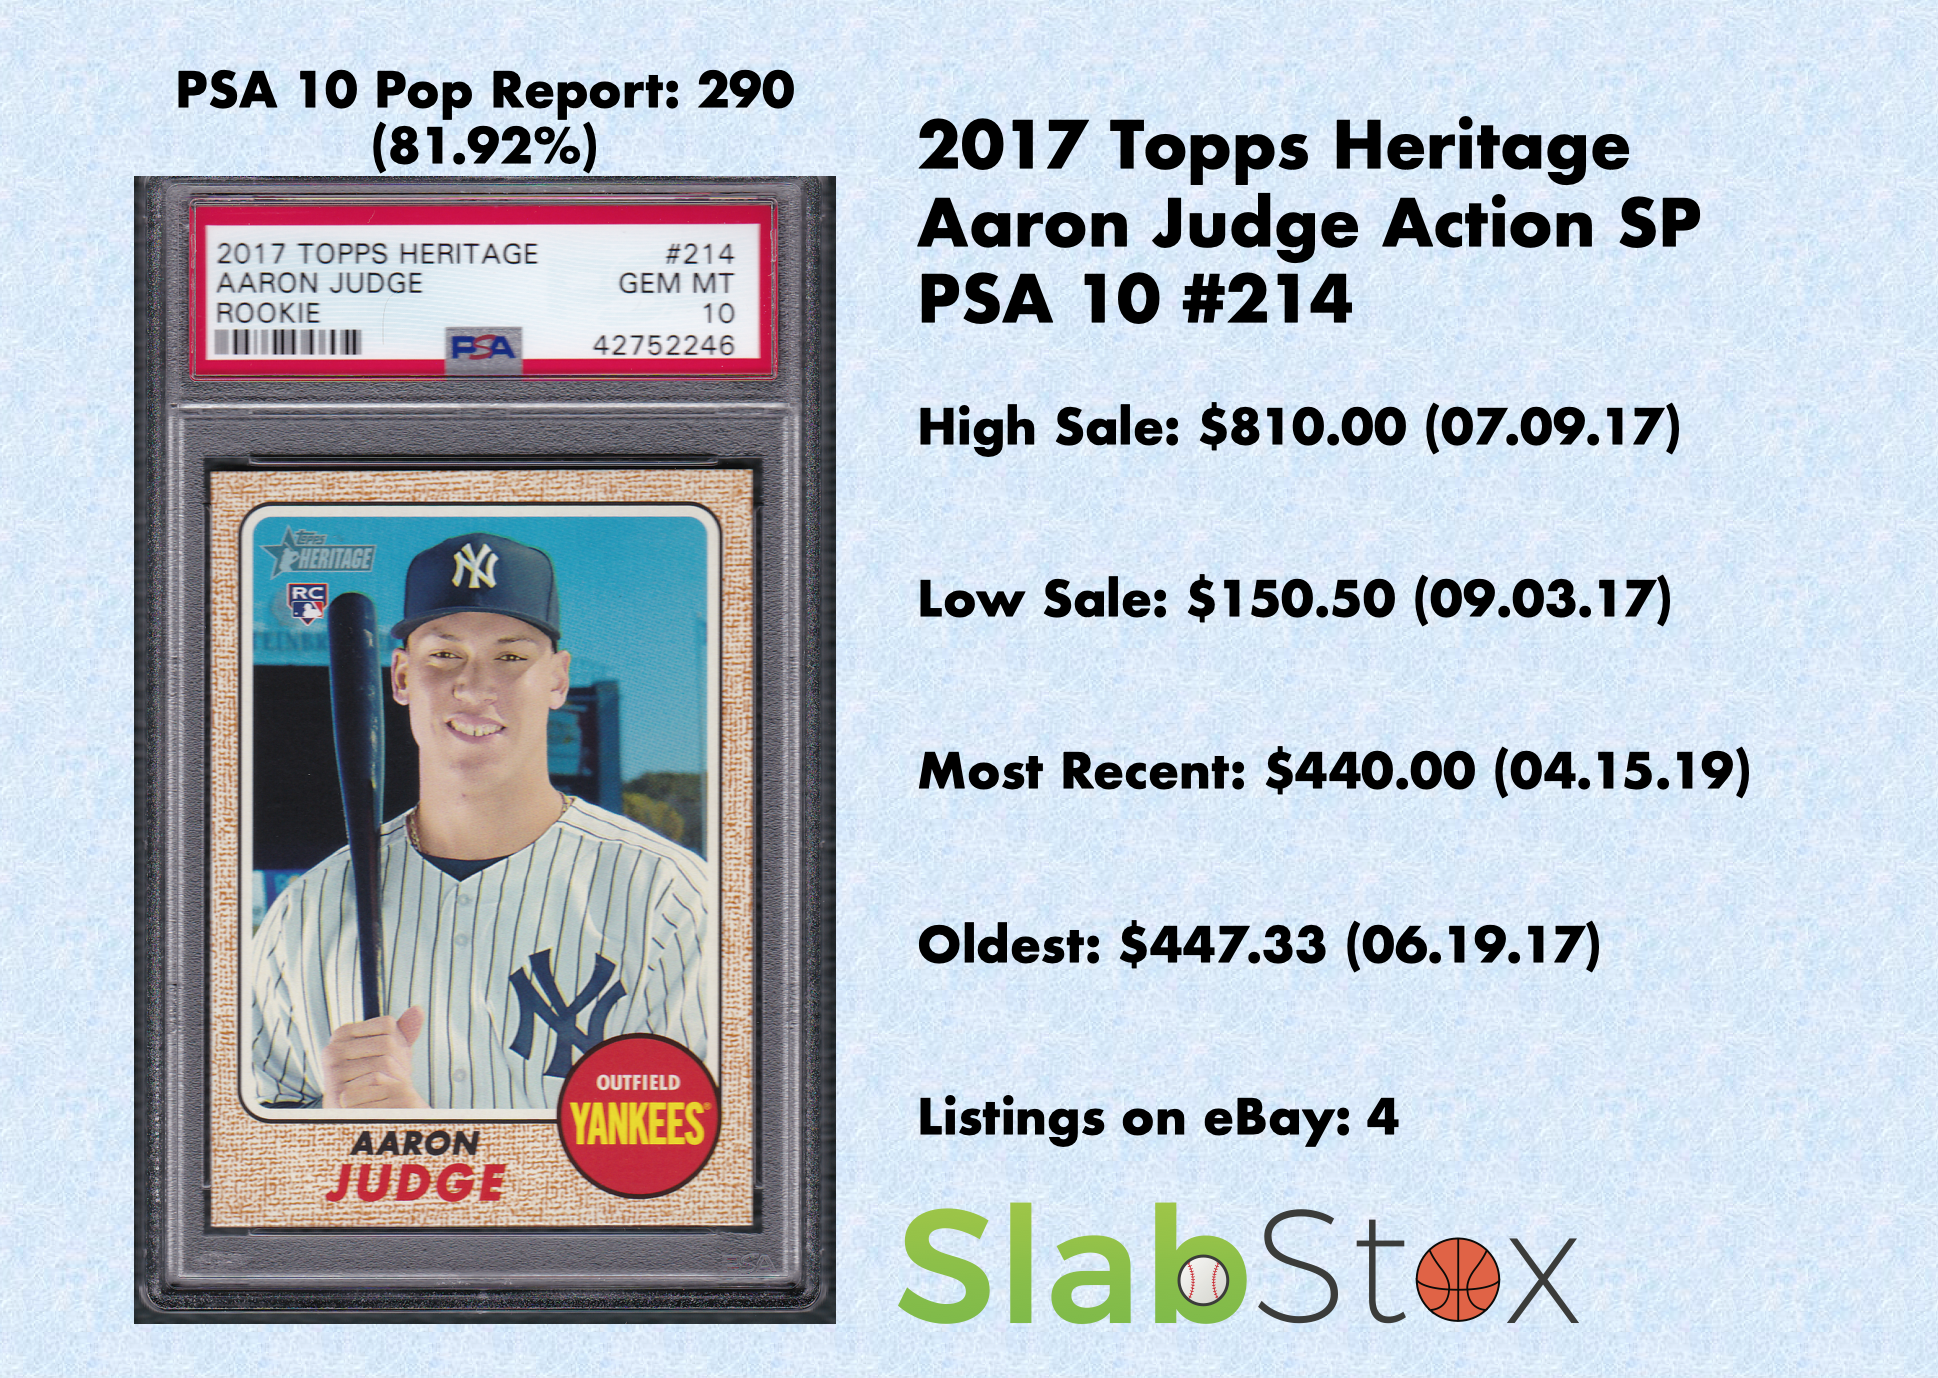 2017 Topps Heritage Aaron Judge Action SP PSA 10 sports card